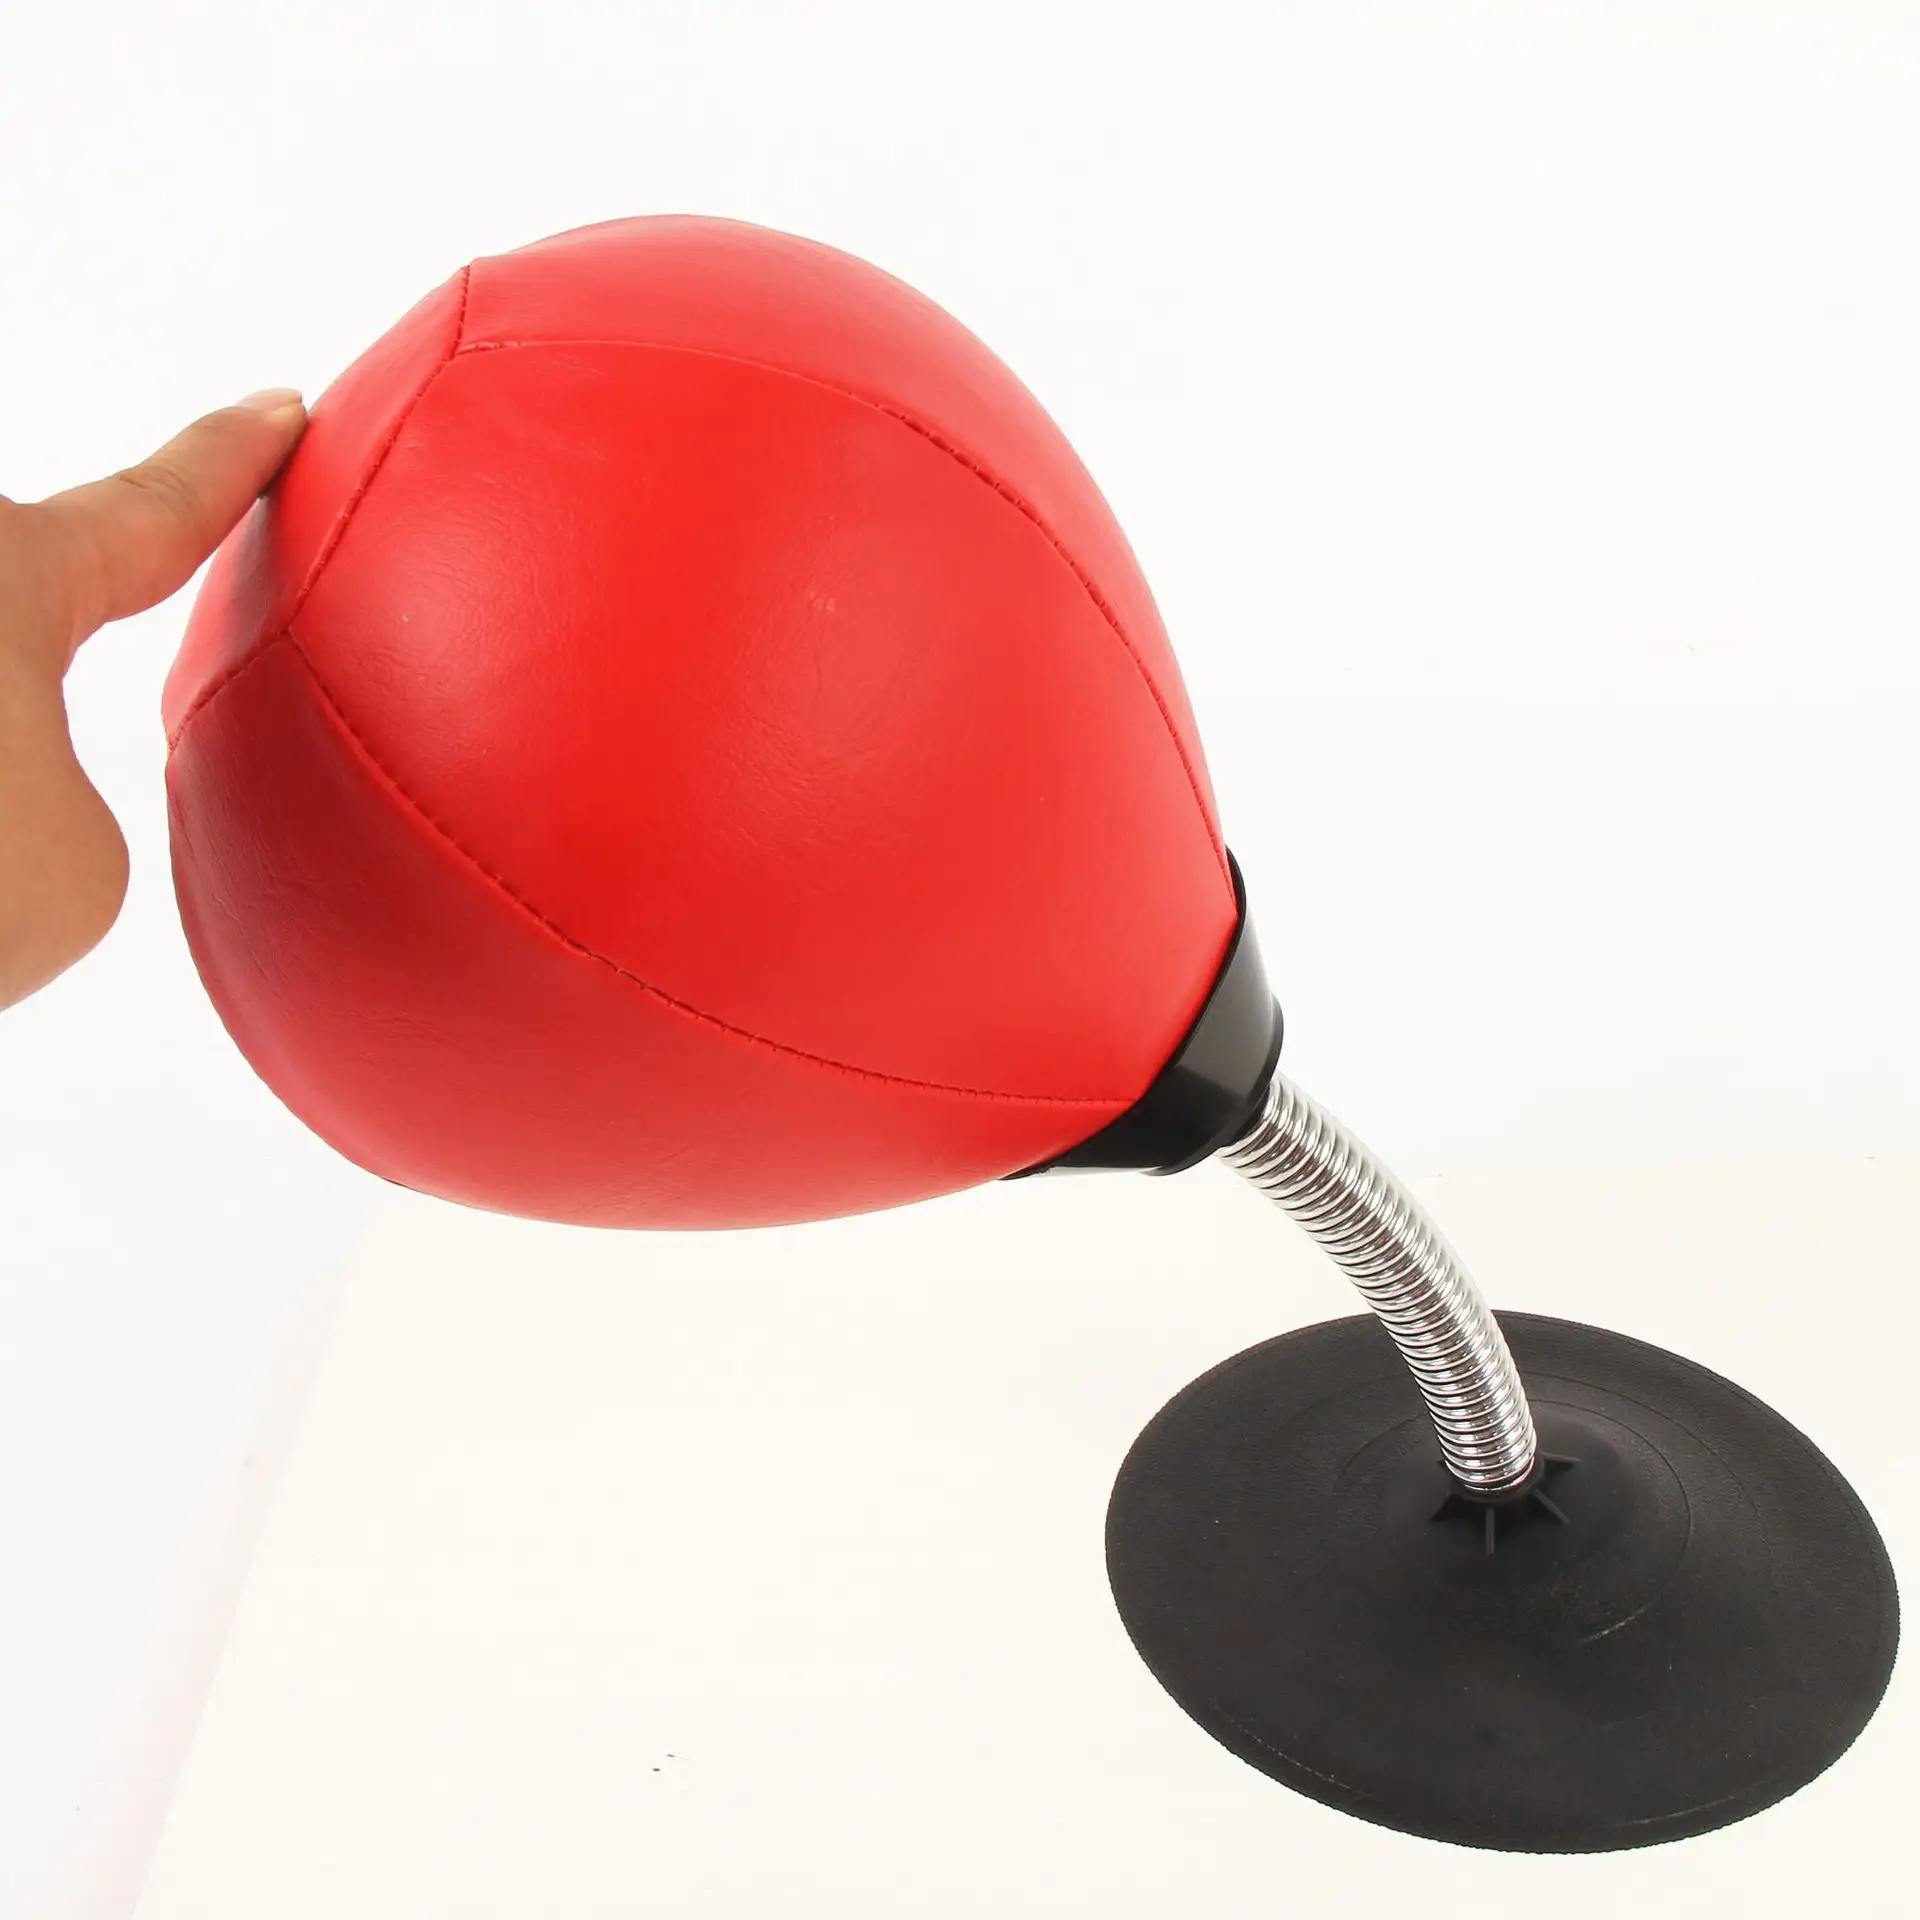 Children's Sandbag Office Speed Ball Small Suction Cup Boxing Reaction Desktop Punching Bag